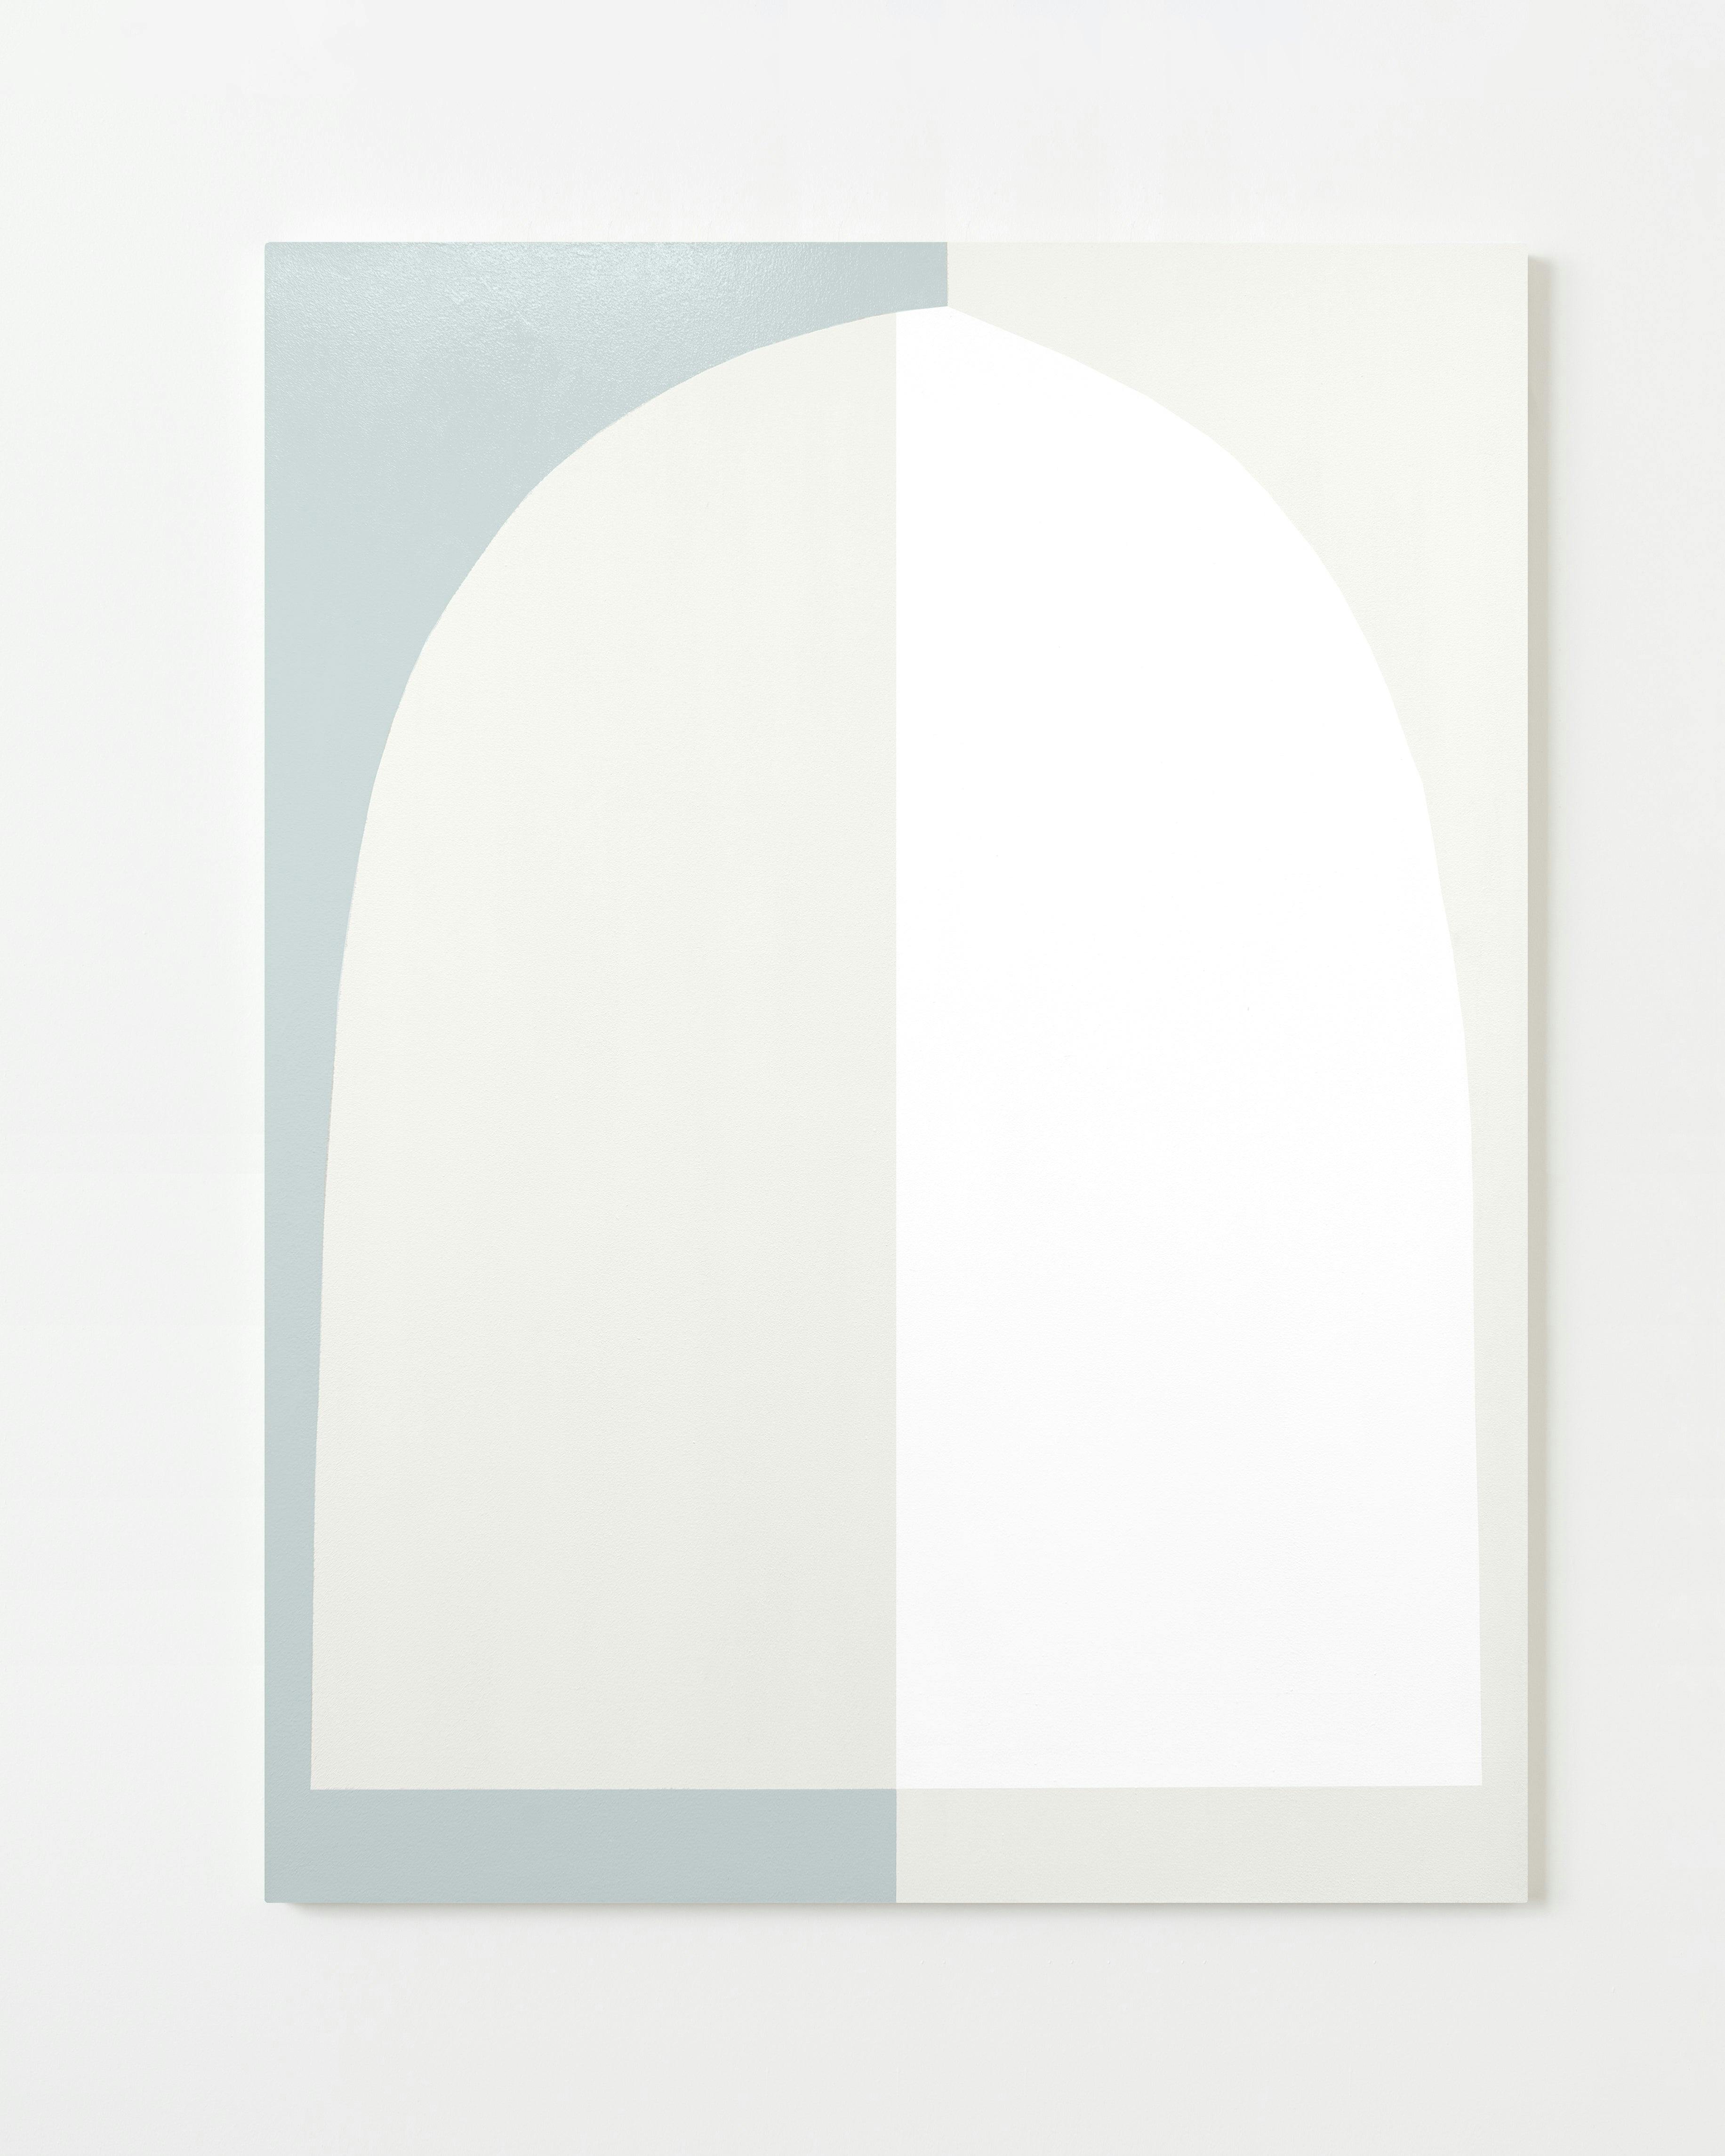 Painting by Aschely Vaughan Cone titled "Double White Arch Doublet".